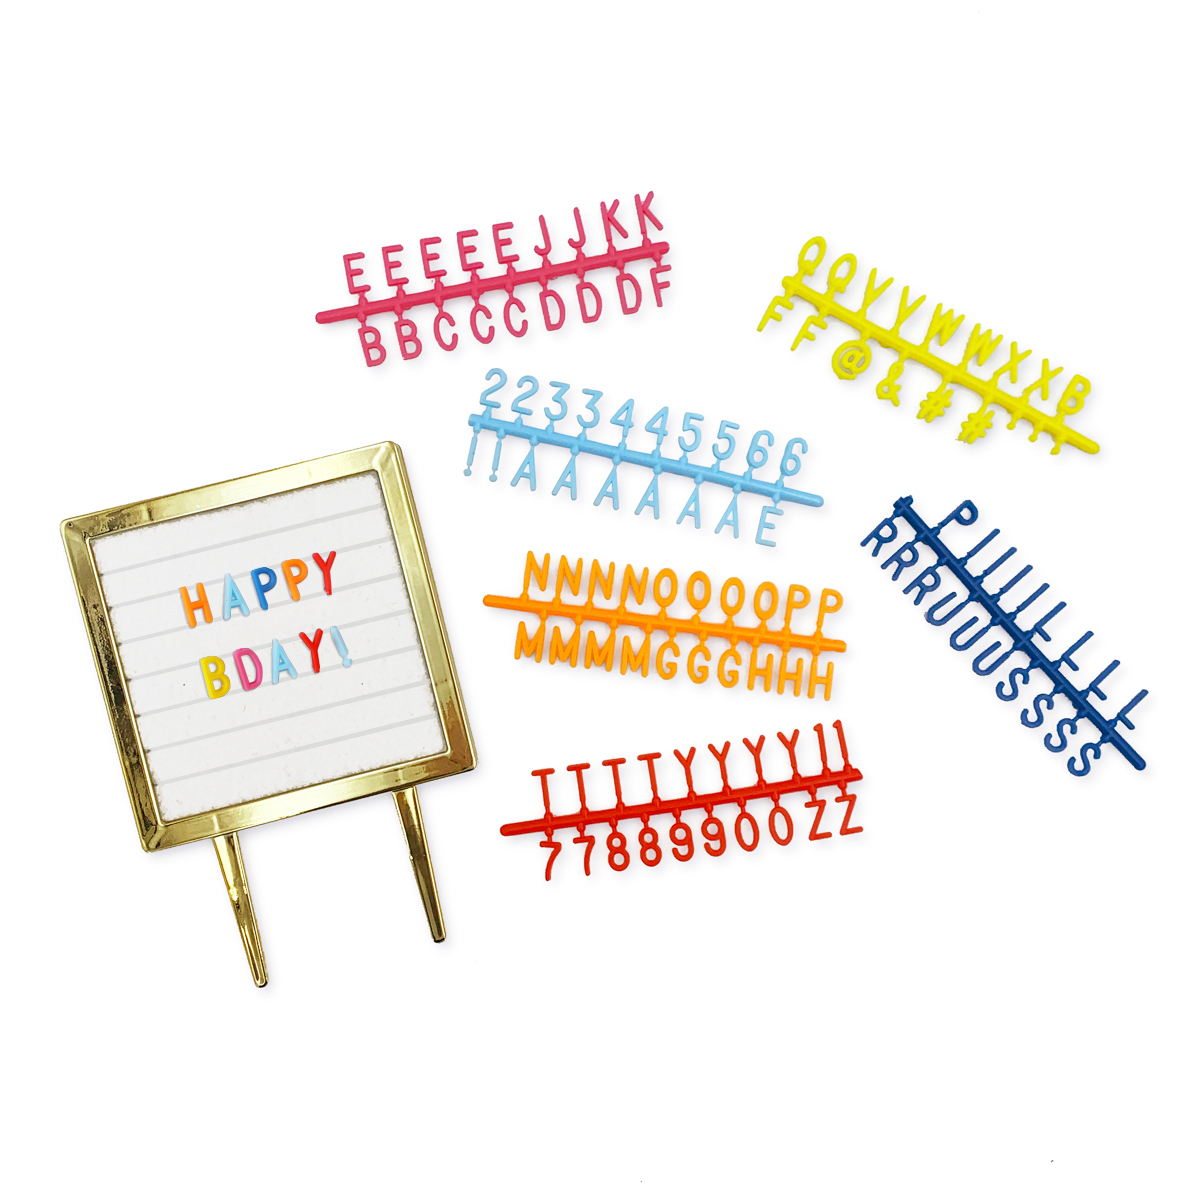 Packed Party 'Spell It Out' Customizable Letter Board Cake Topper, Birthday Cake Decoration Size: 11 inch x 5.9 inch, Multicolor